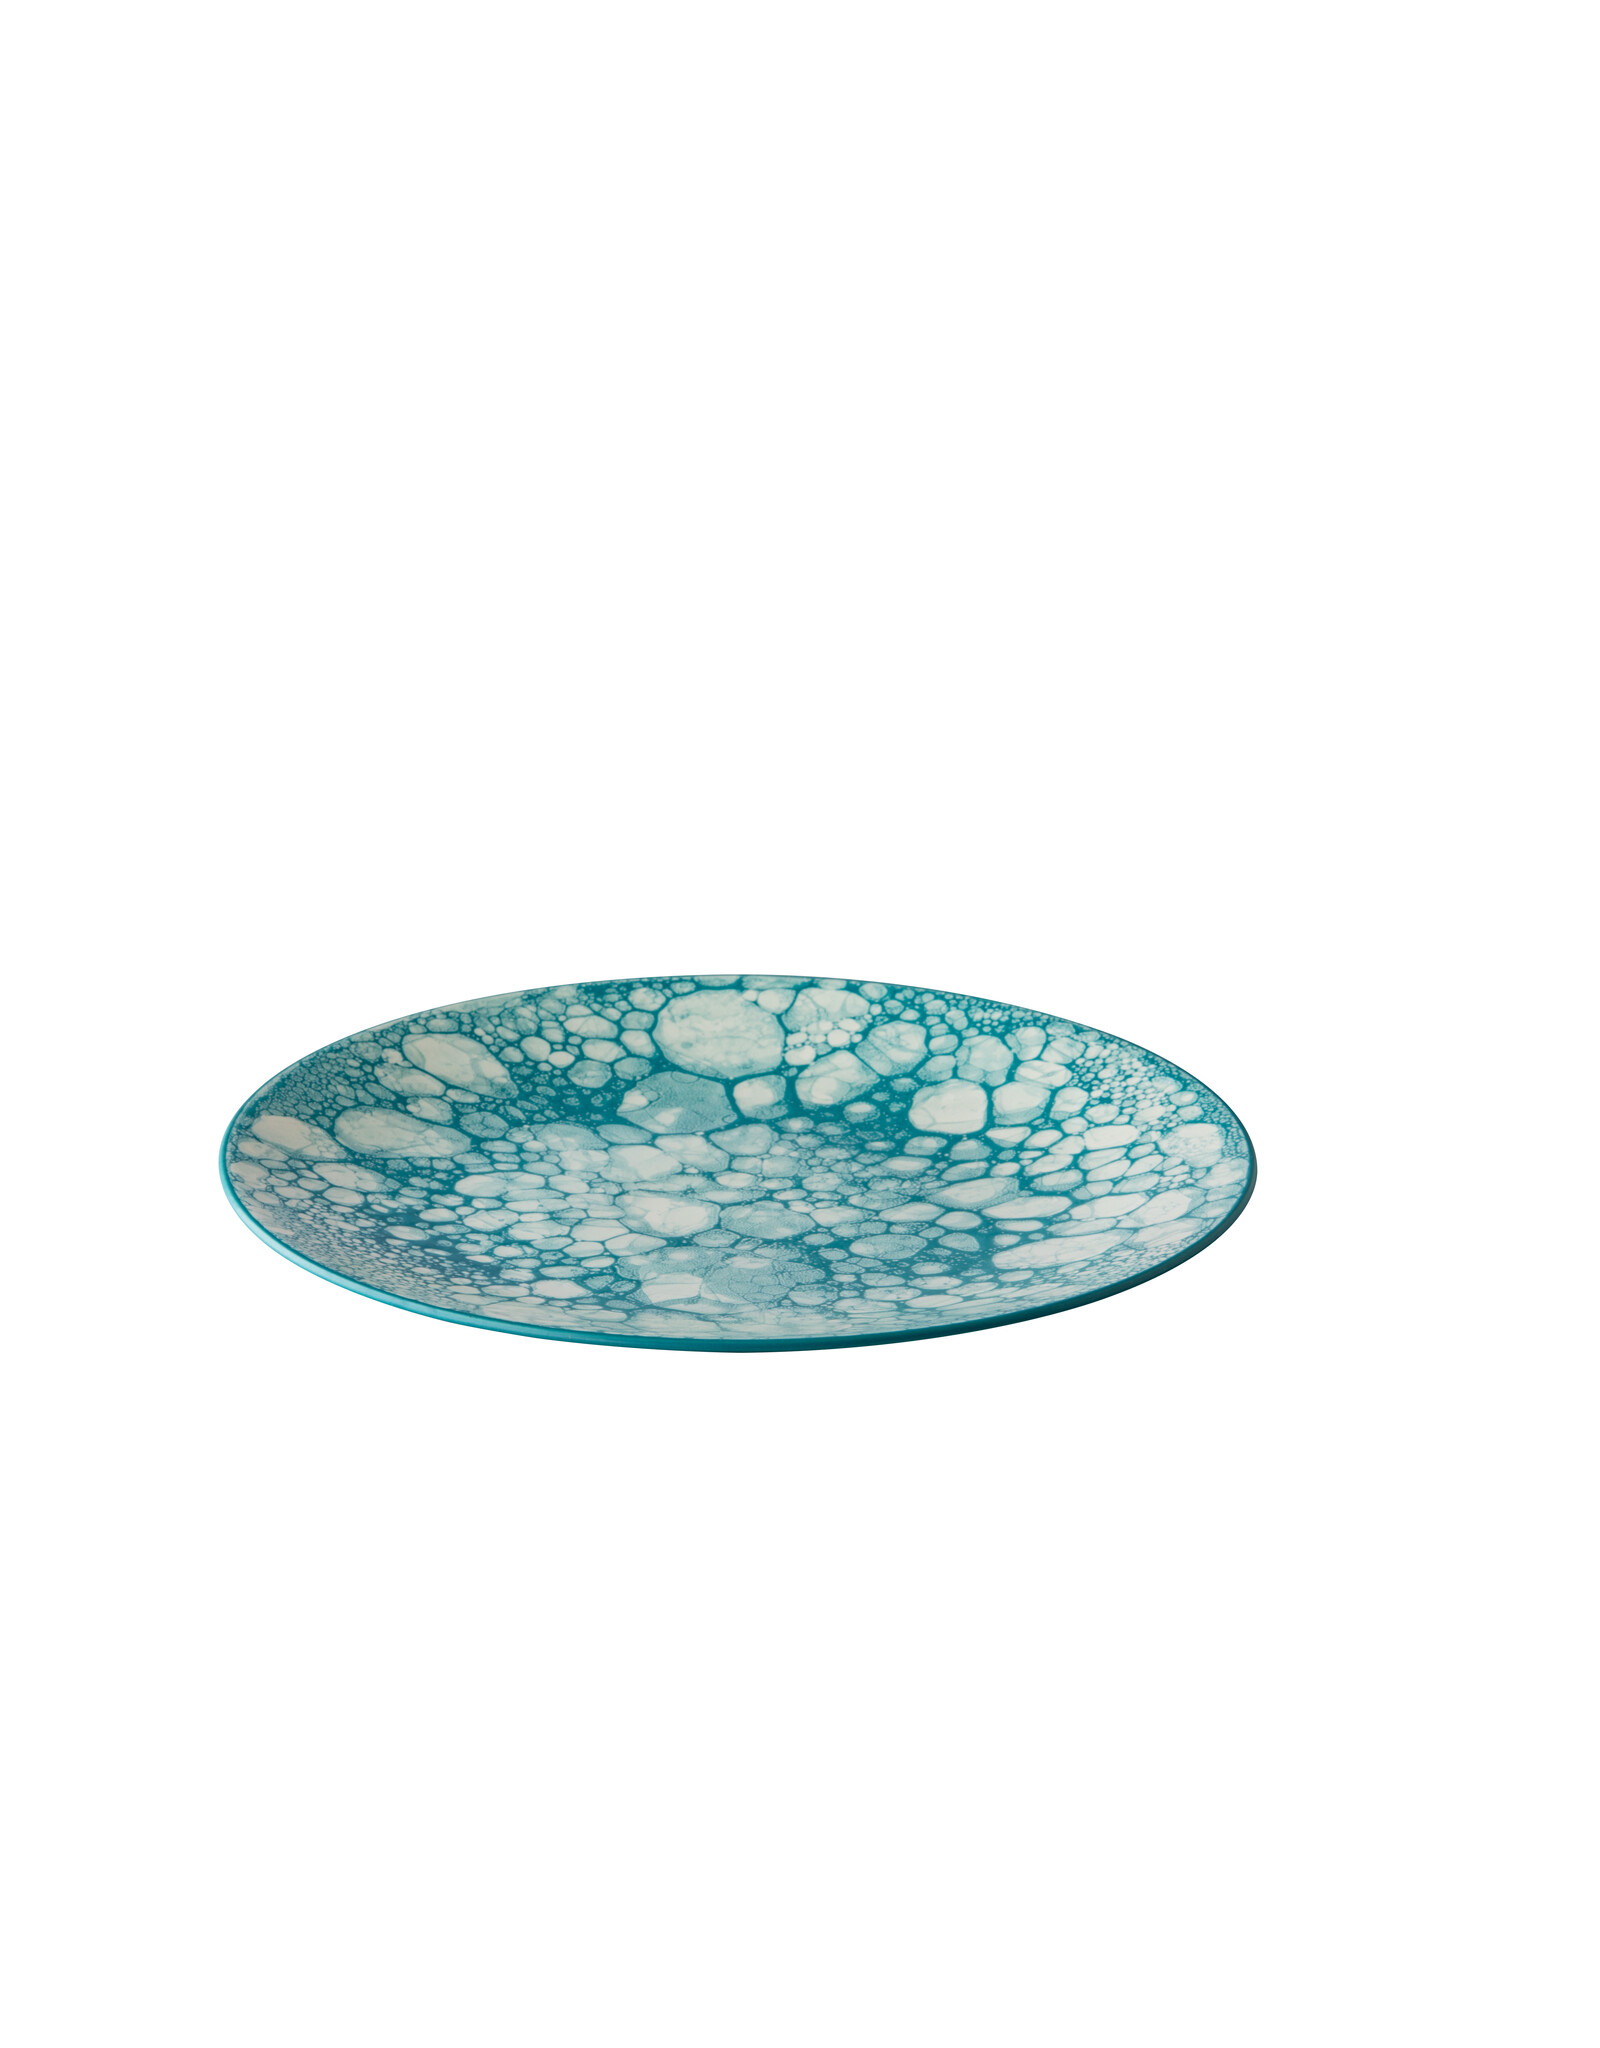 Stylepoint Bord Bubble turquoise 27,5 cm